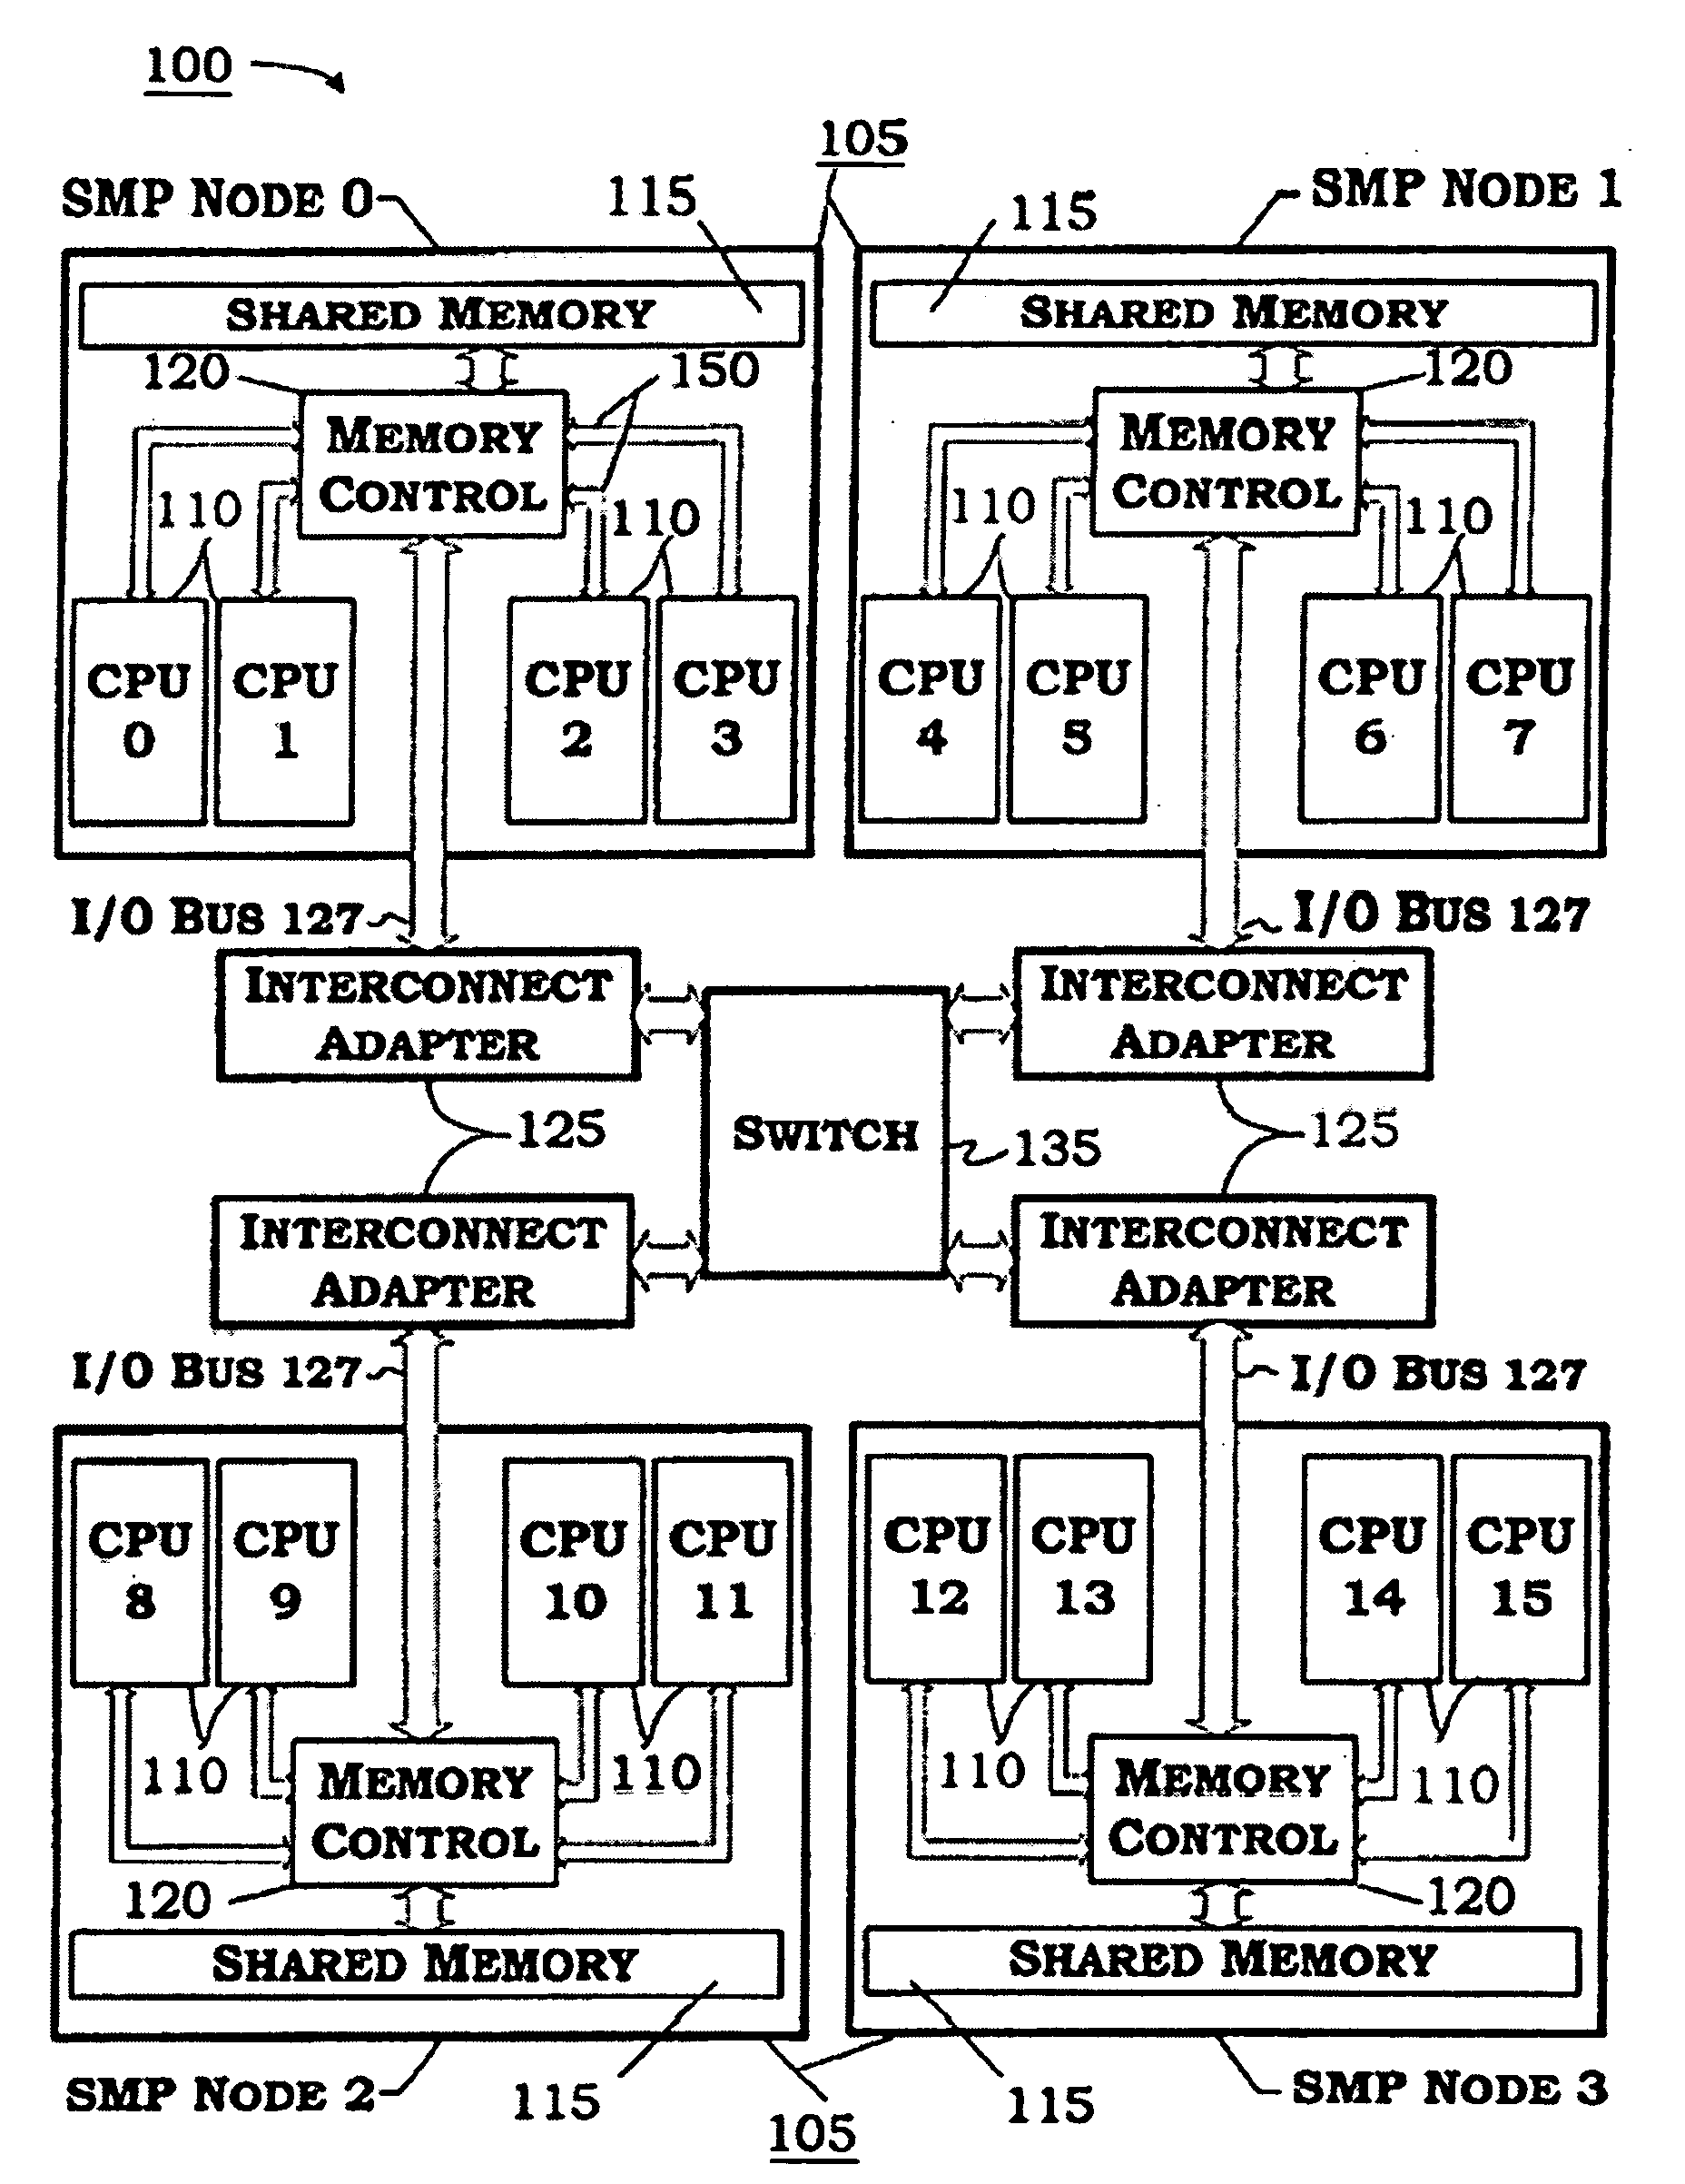 Default locality selection for memory objects based on determining the type of a particular memory object